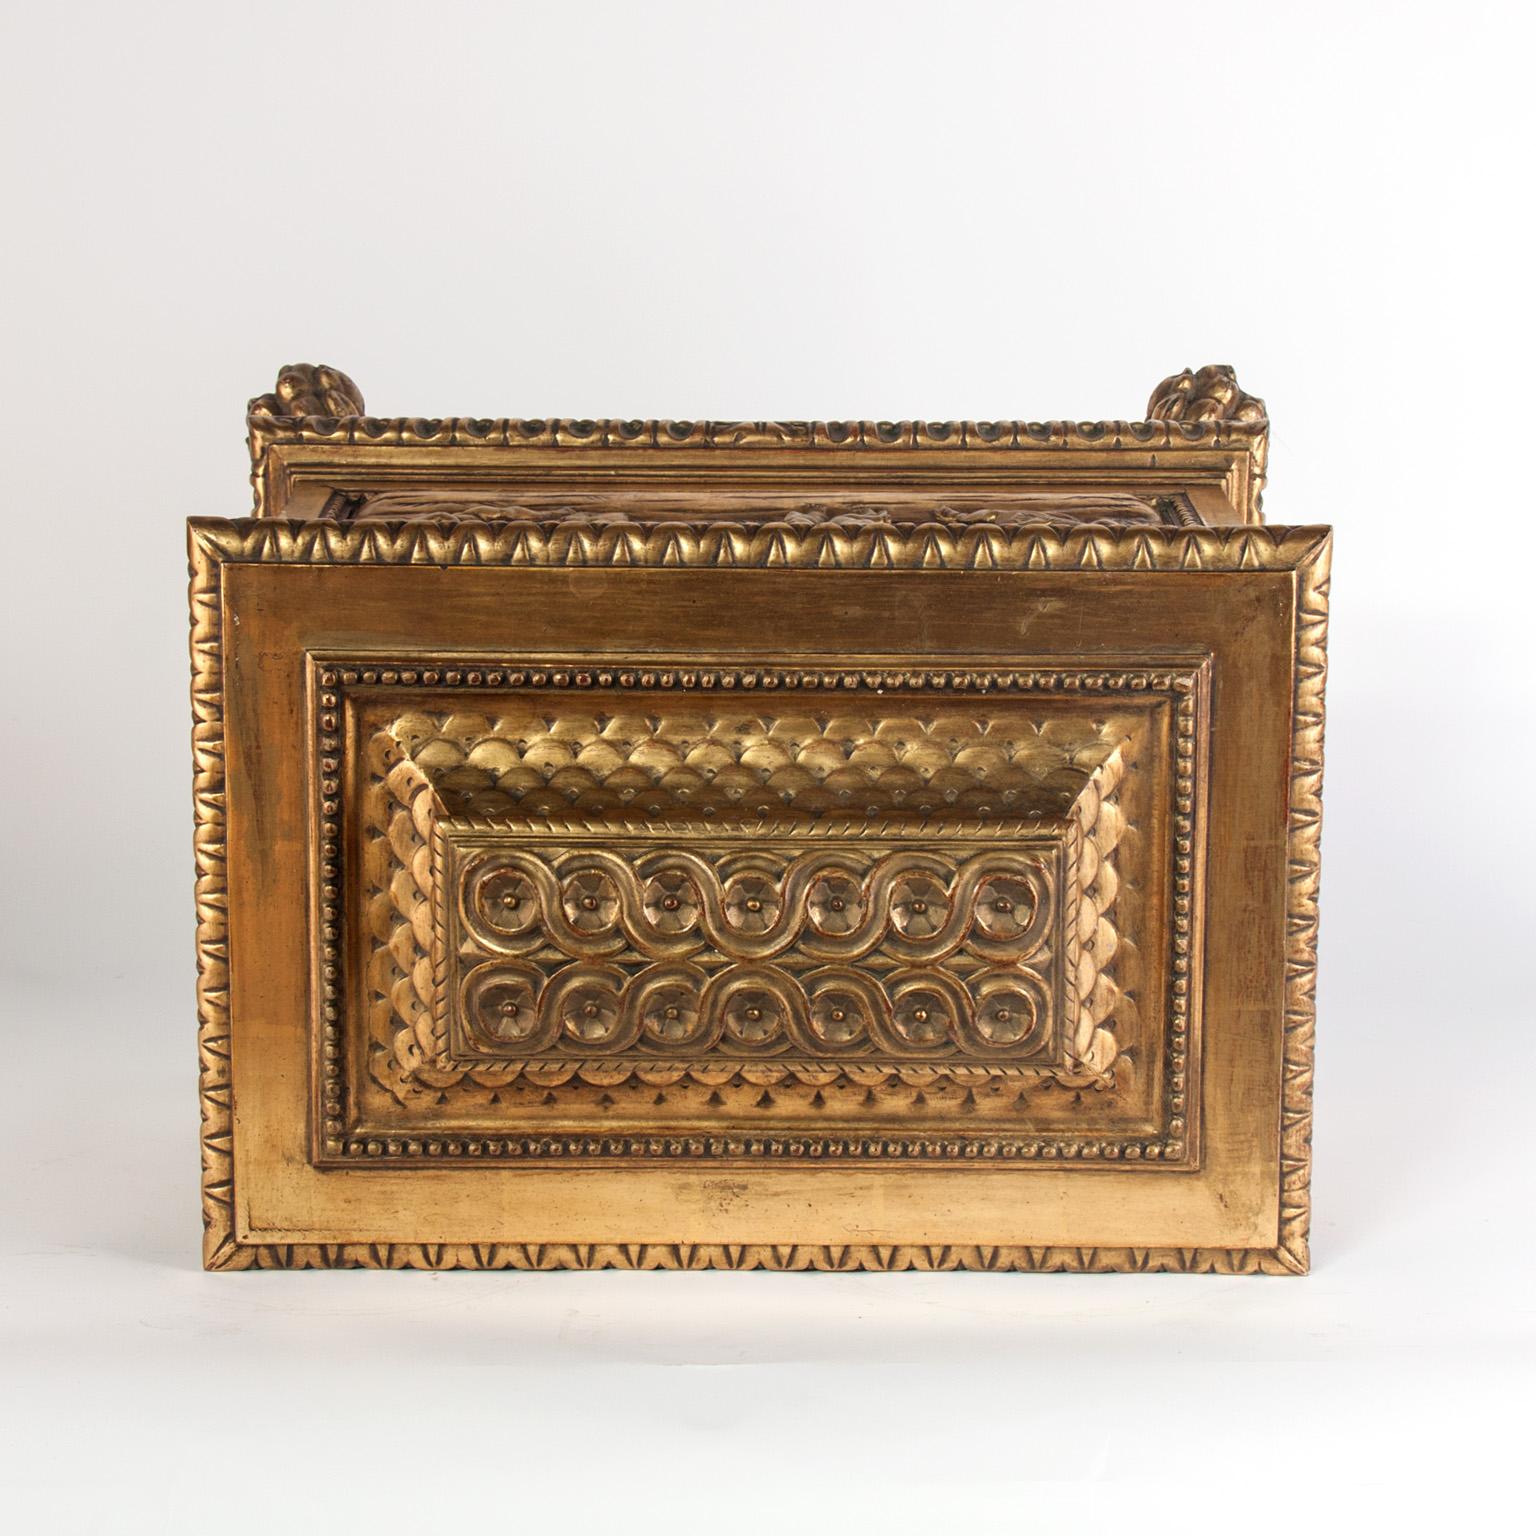 19th Century Italian 19th C. polychromed Wooden Casket. For Sale